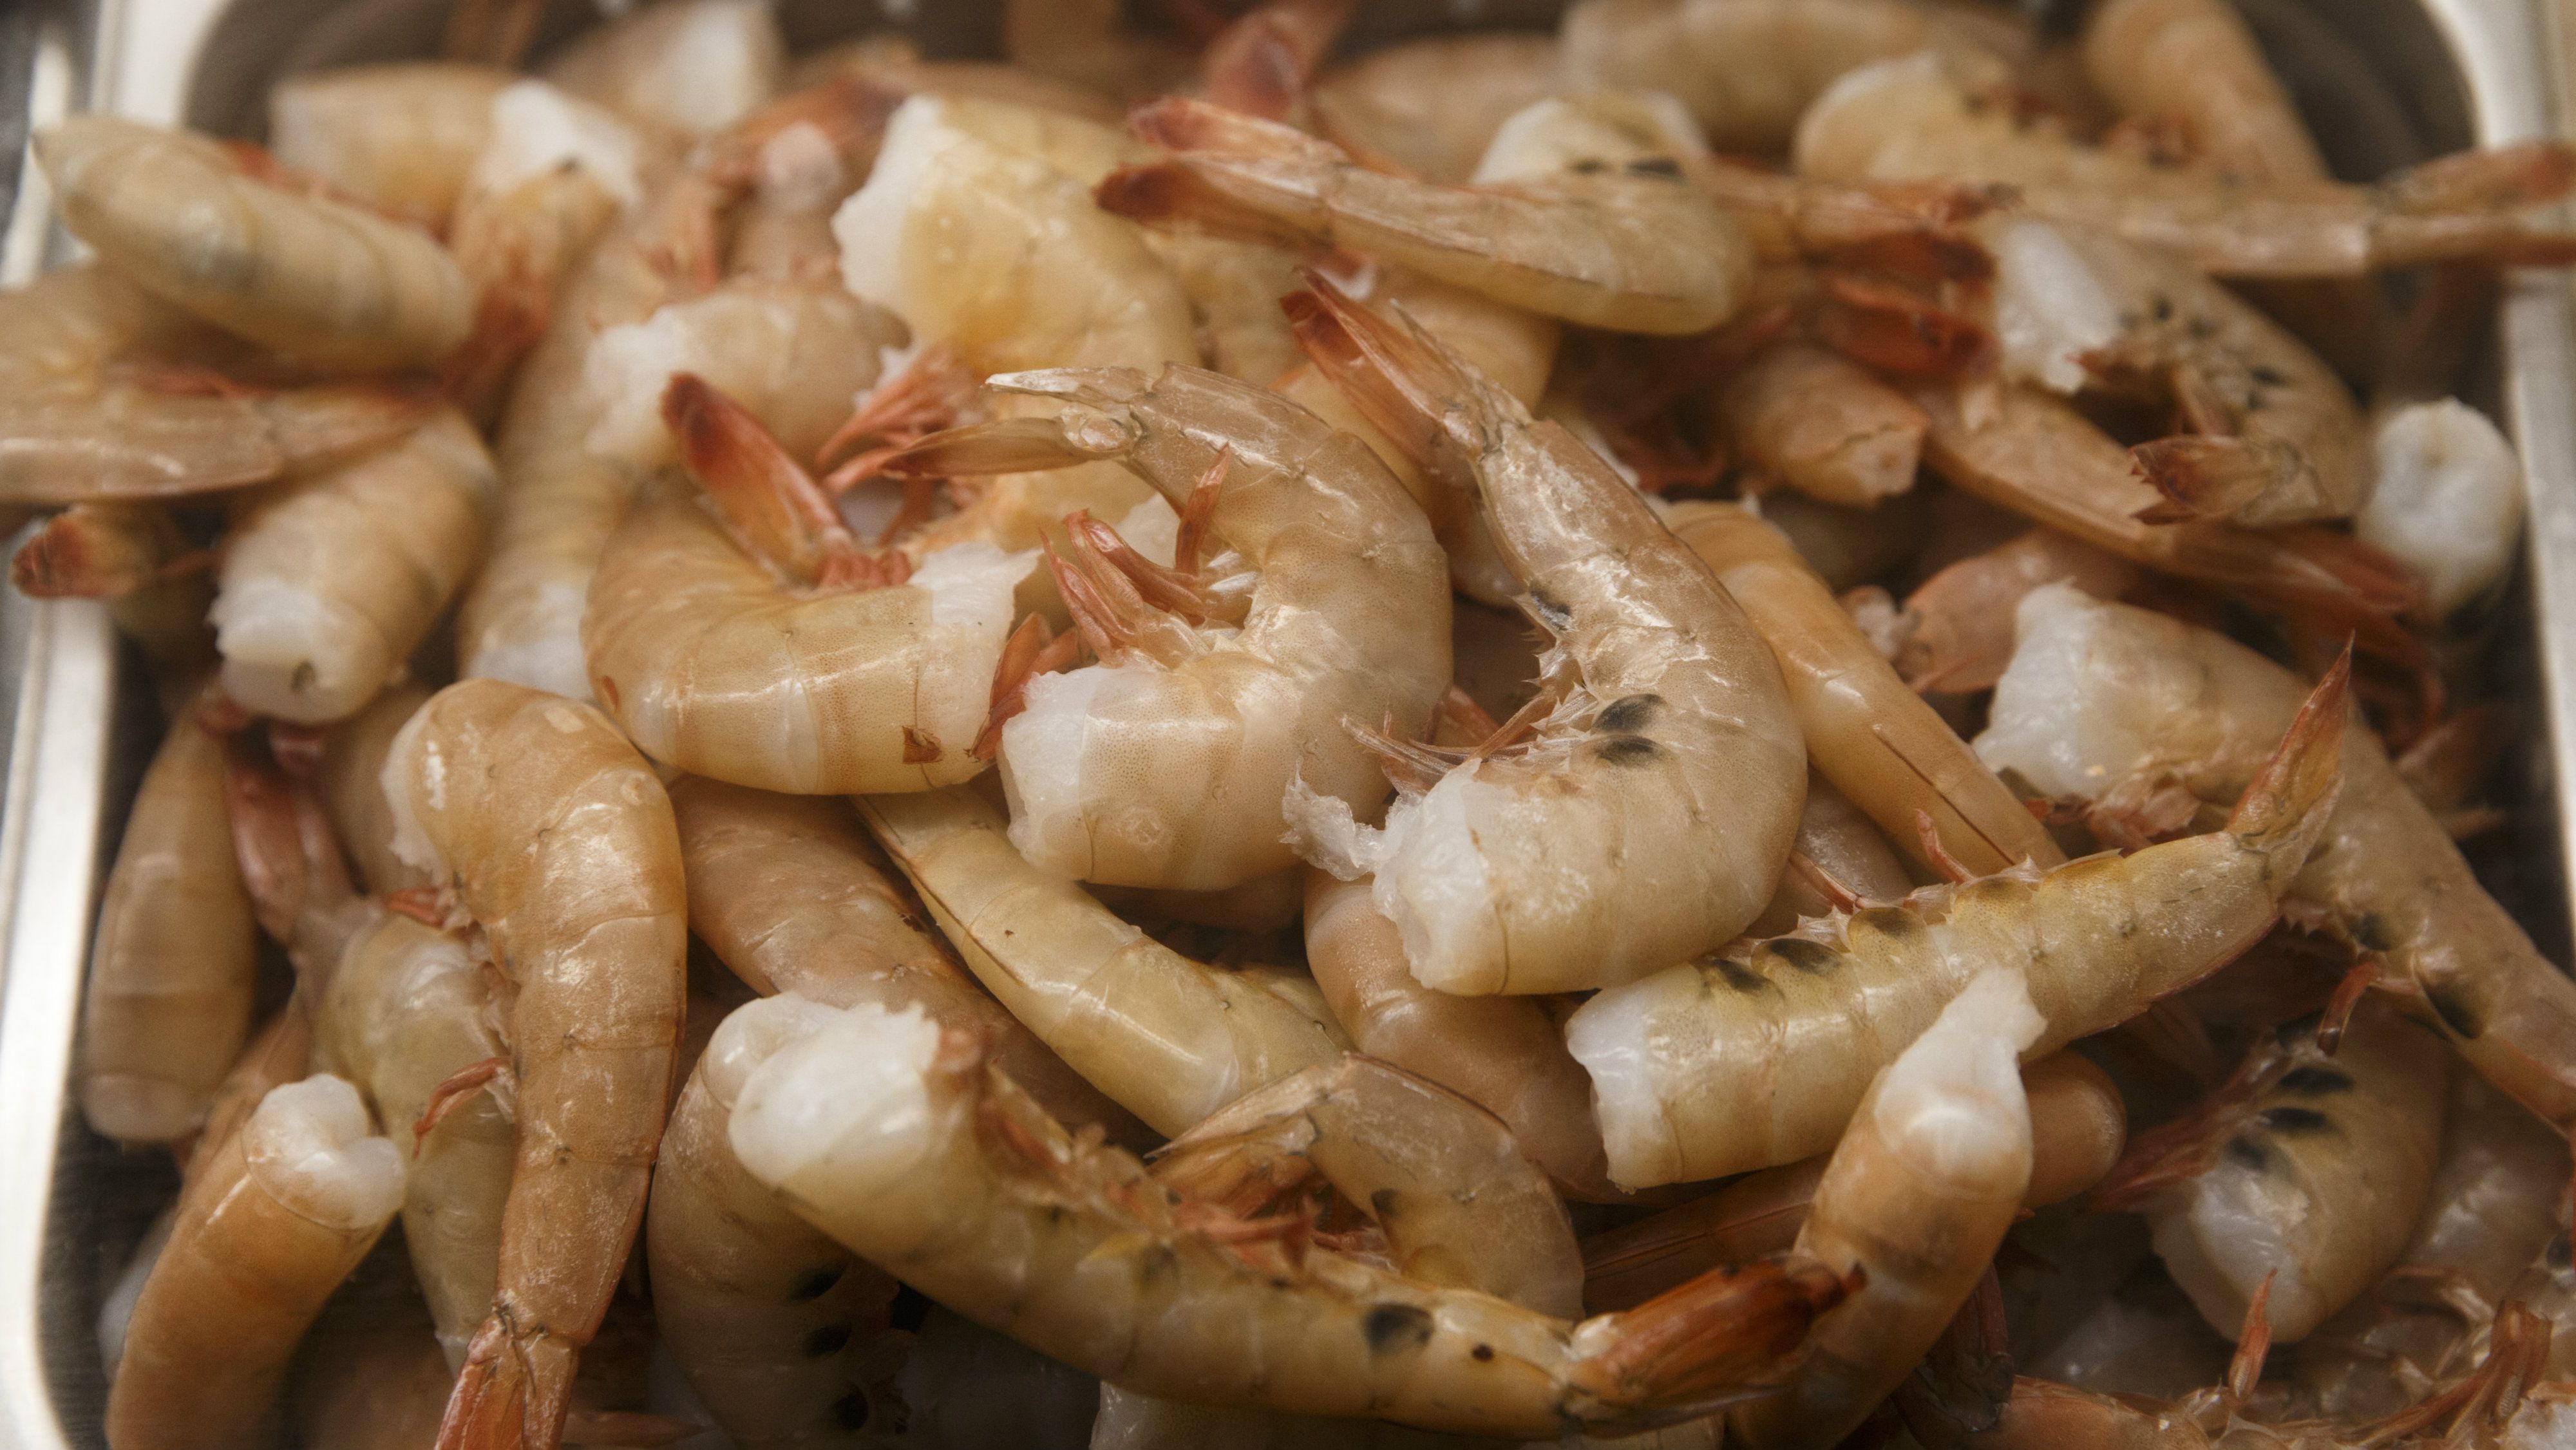 Test finds 60% of raw shrimp tainted with bacteria, including ...